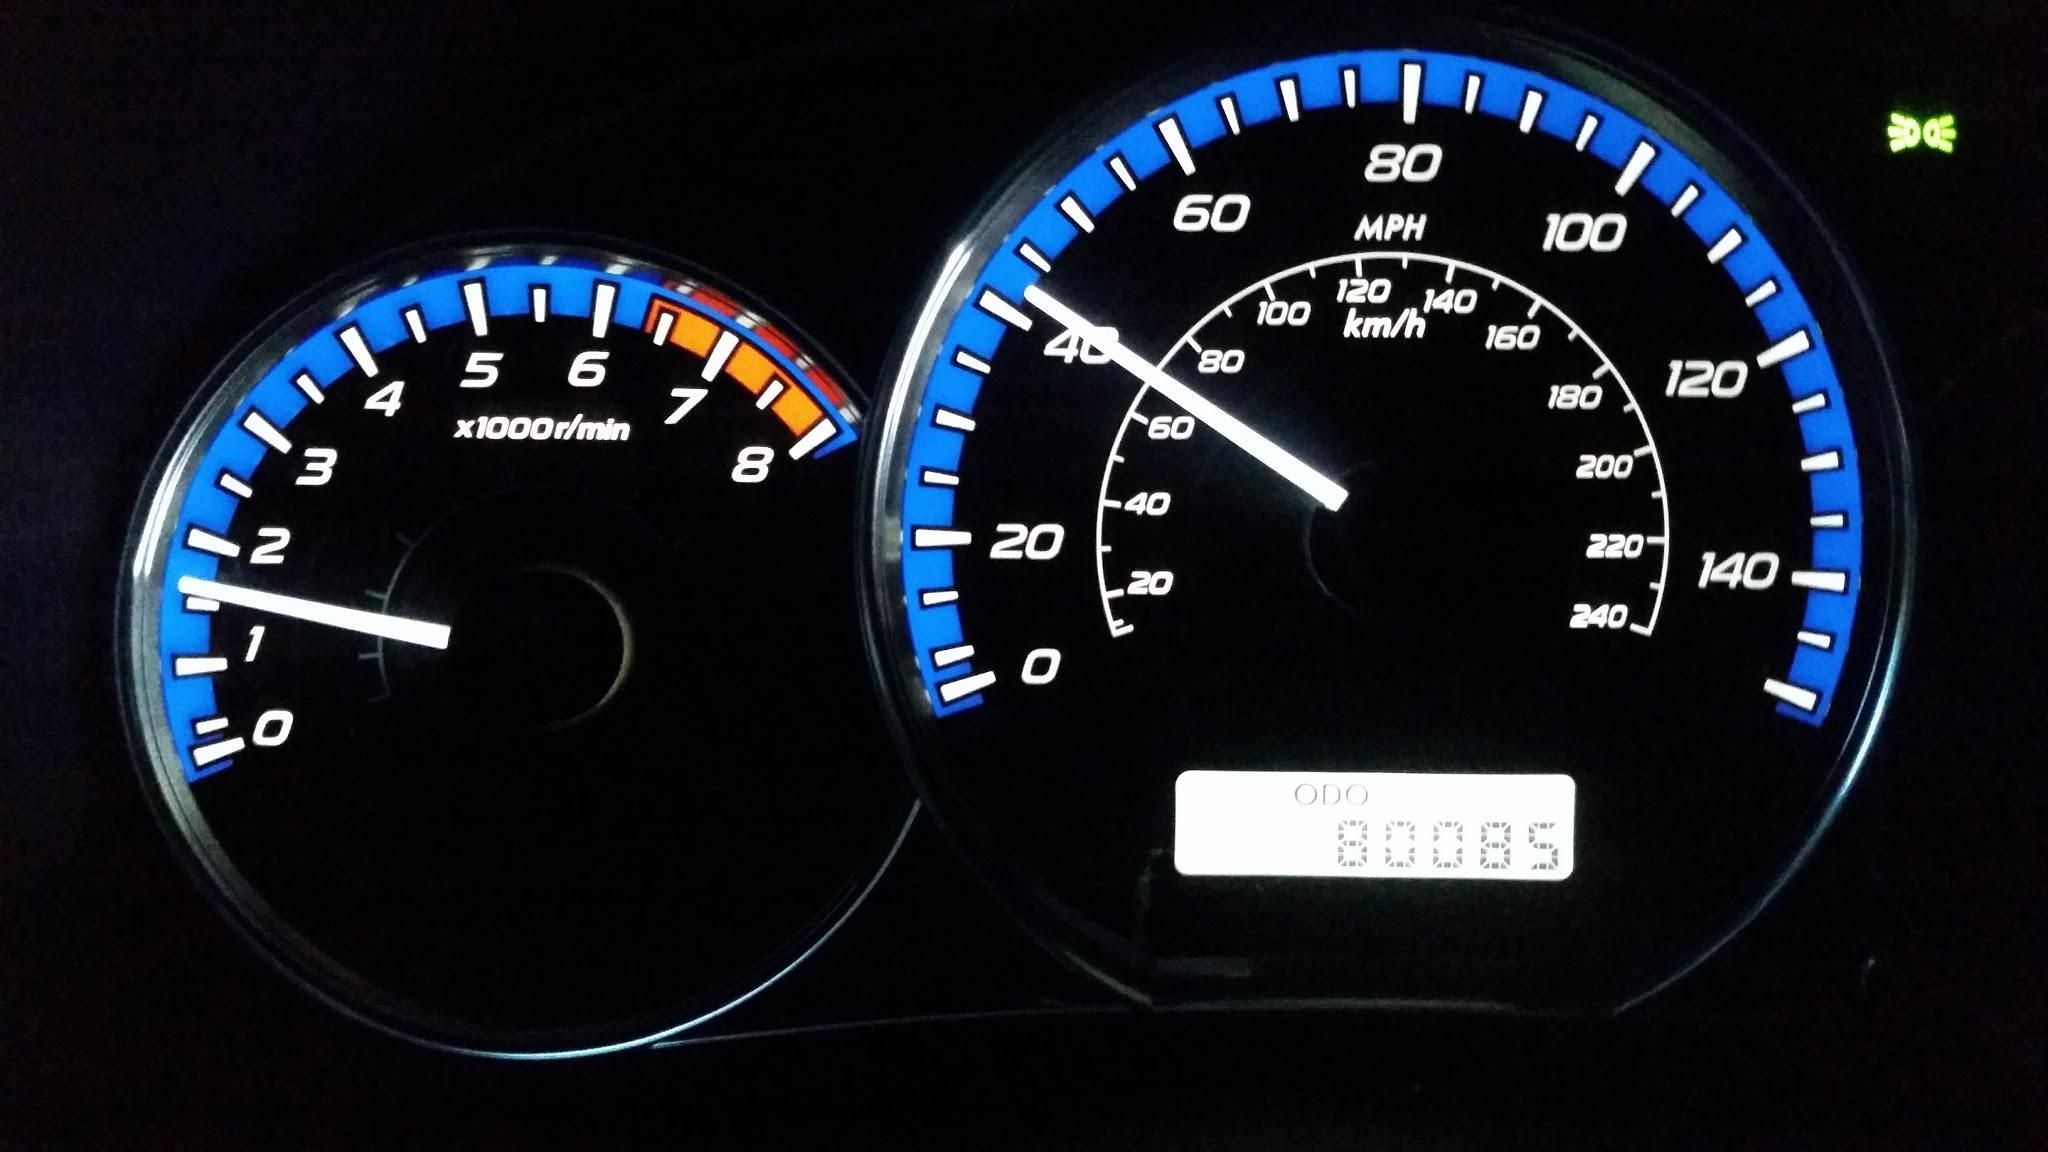 My wife wondered why I was so excited to hit 80k miles